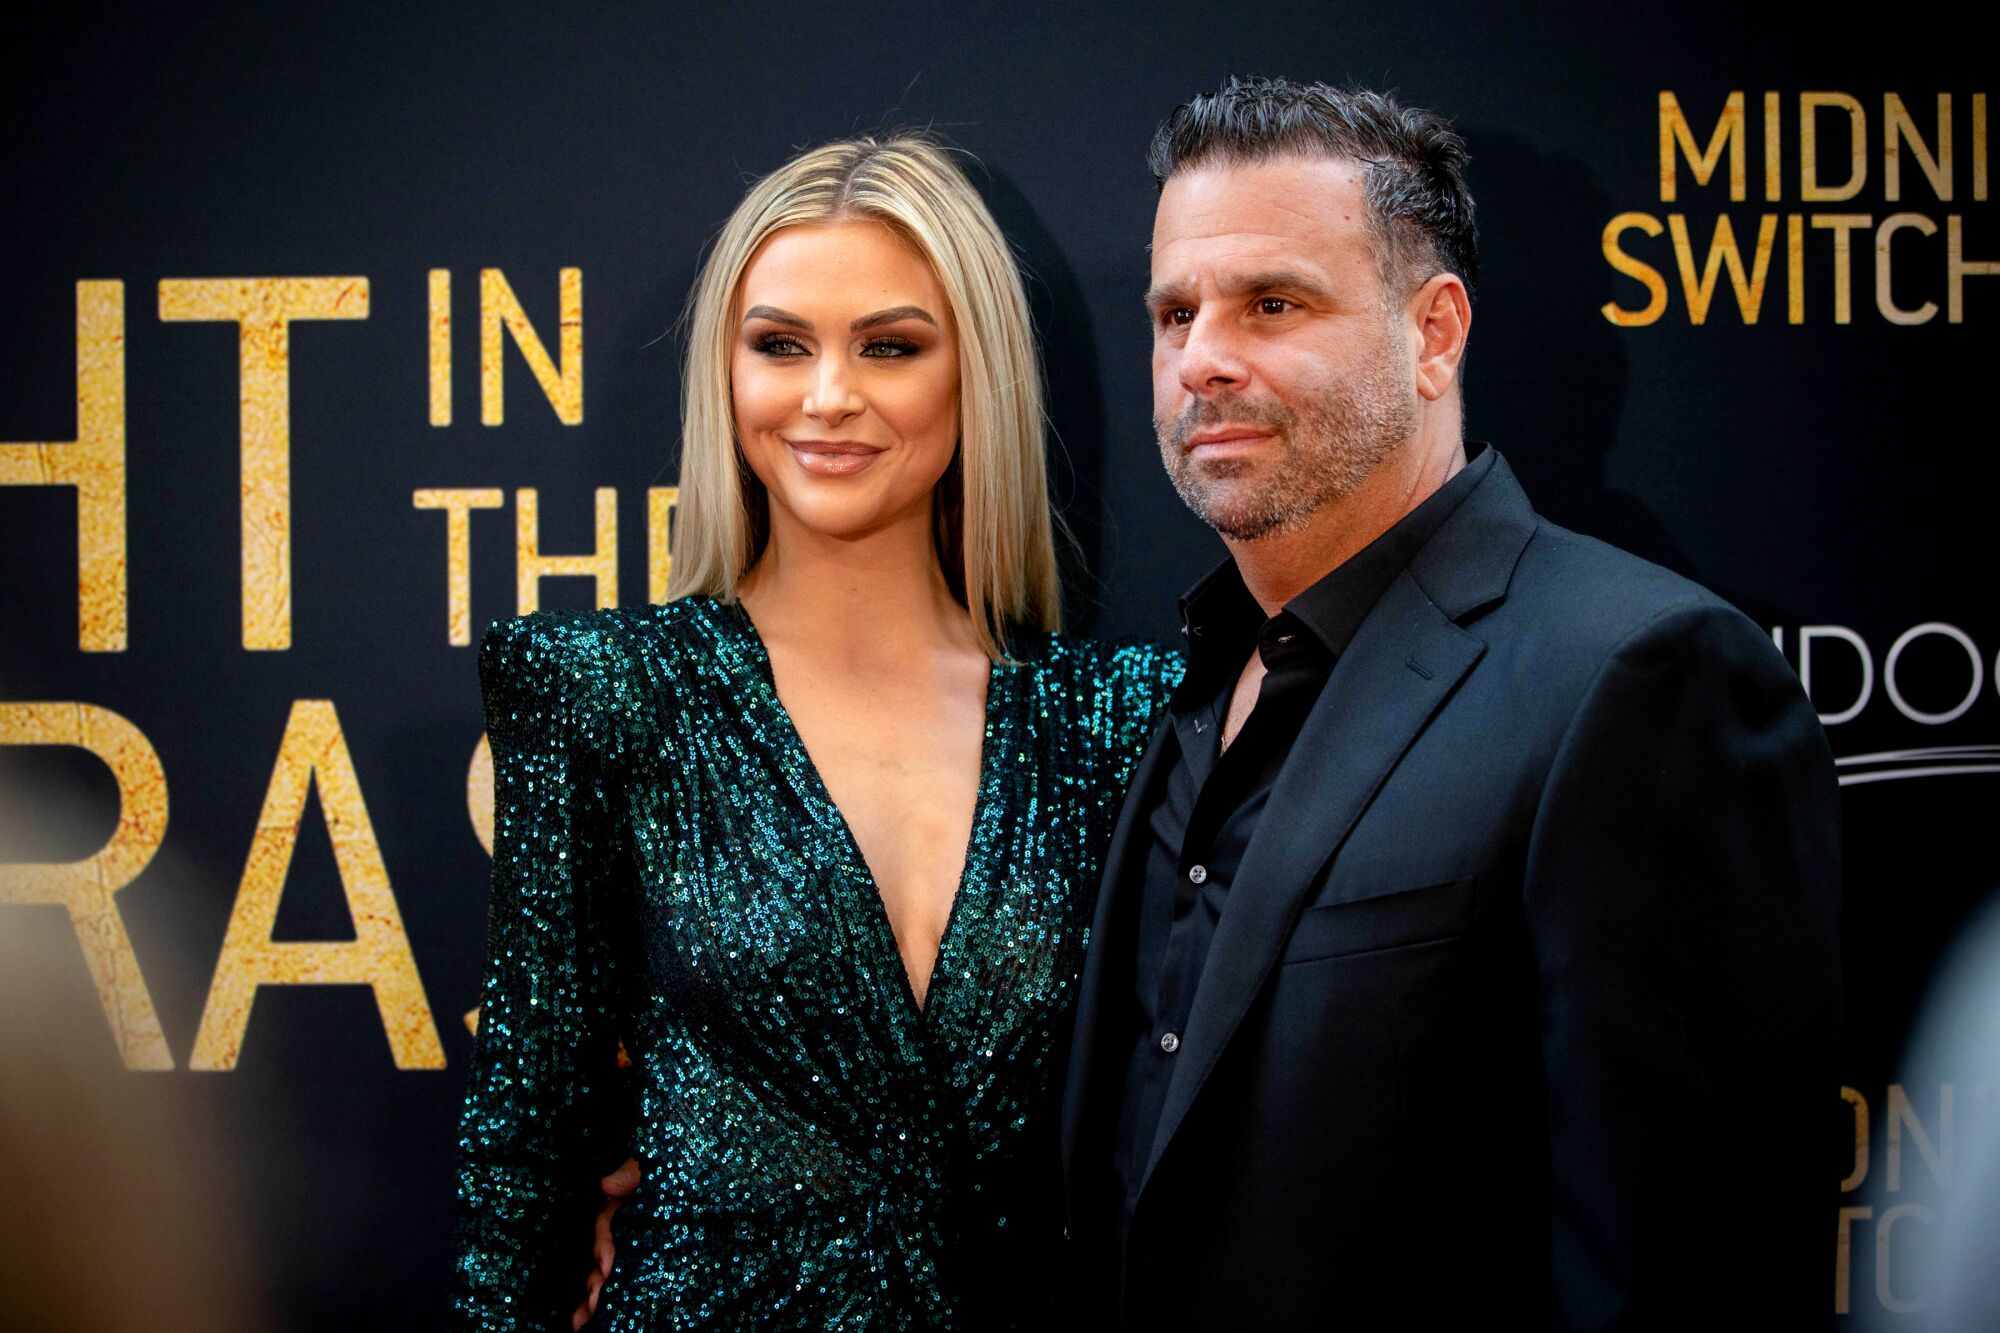 Lala Kent and Randall Emmett at a movie premiere